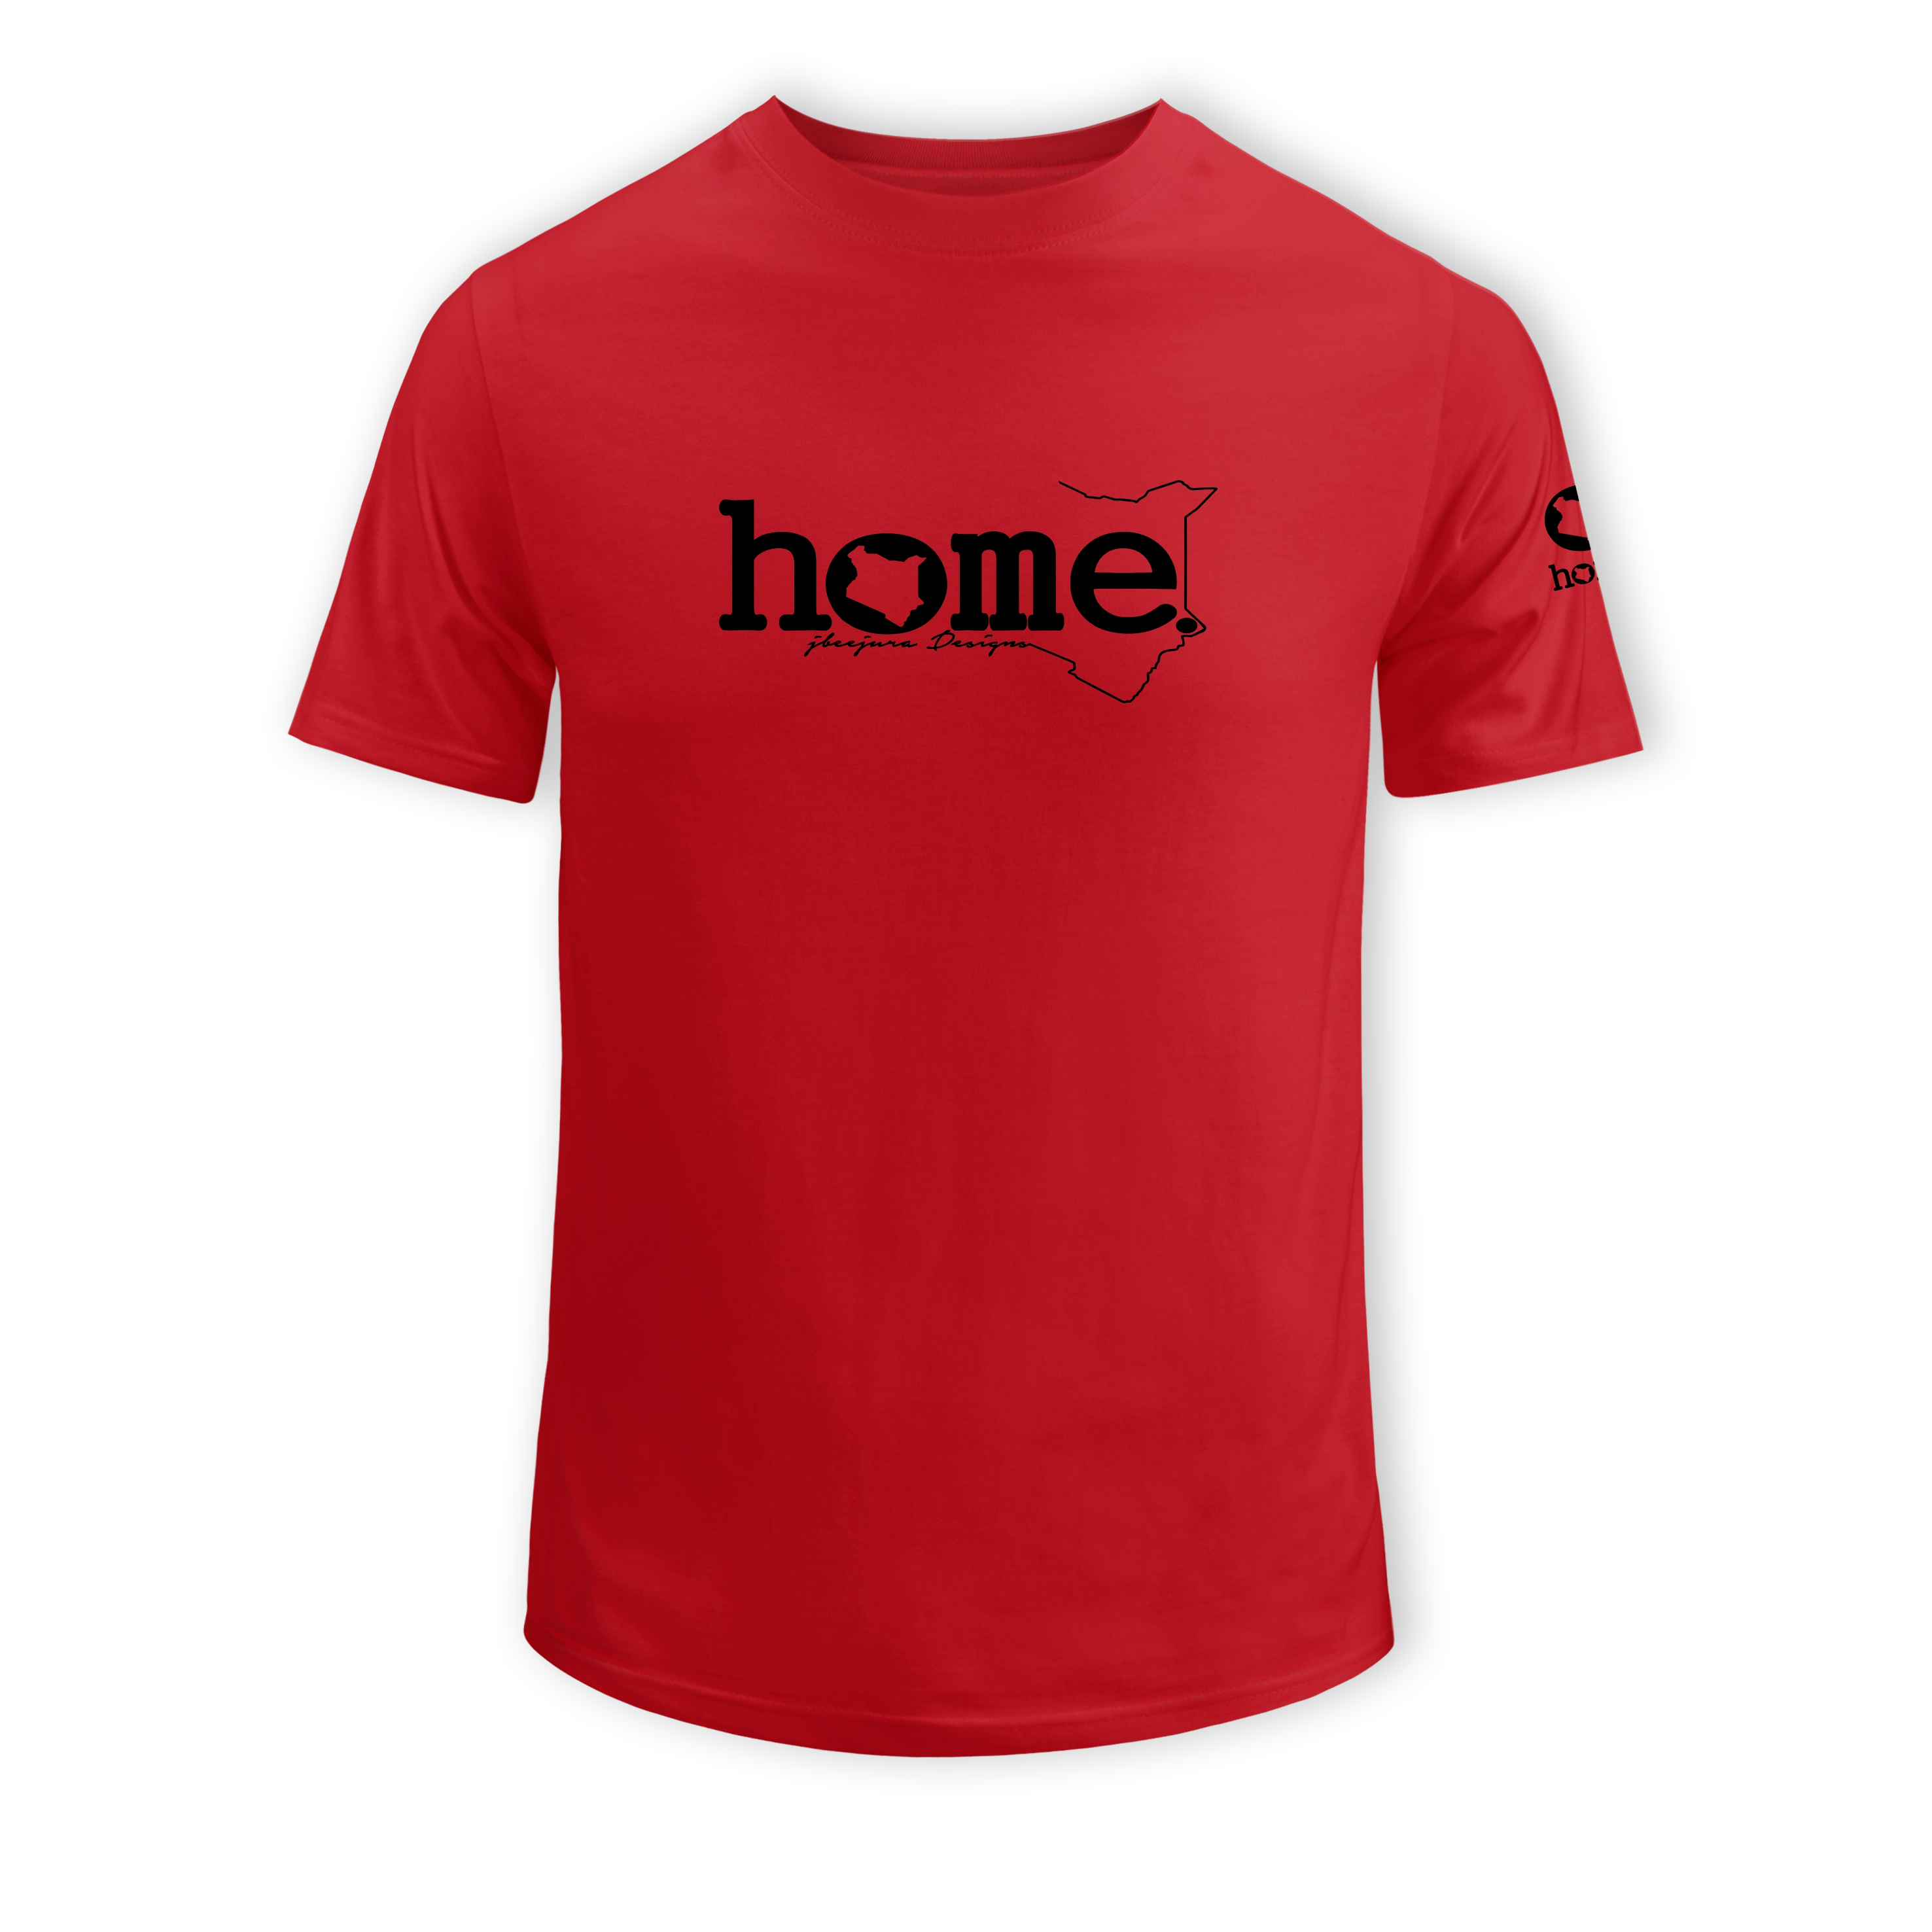 home_254 KIDS SHORT-SLEEVED RED T-SHIRT WITH A BLACK CLASSIC WORDS PRINT – COTTON PLUS FABRIC